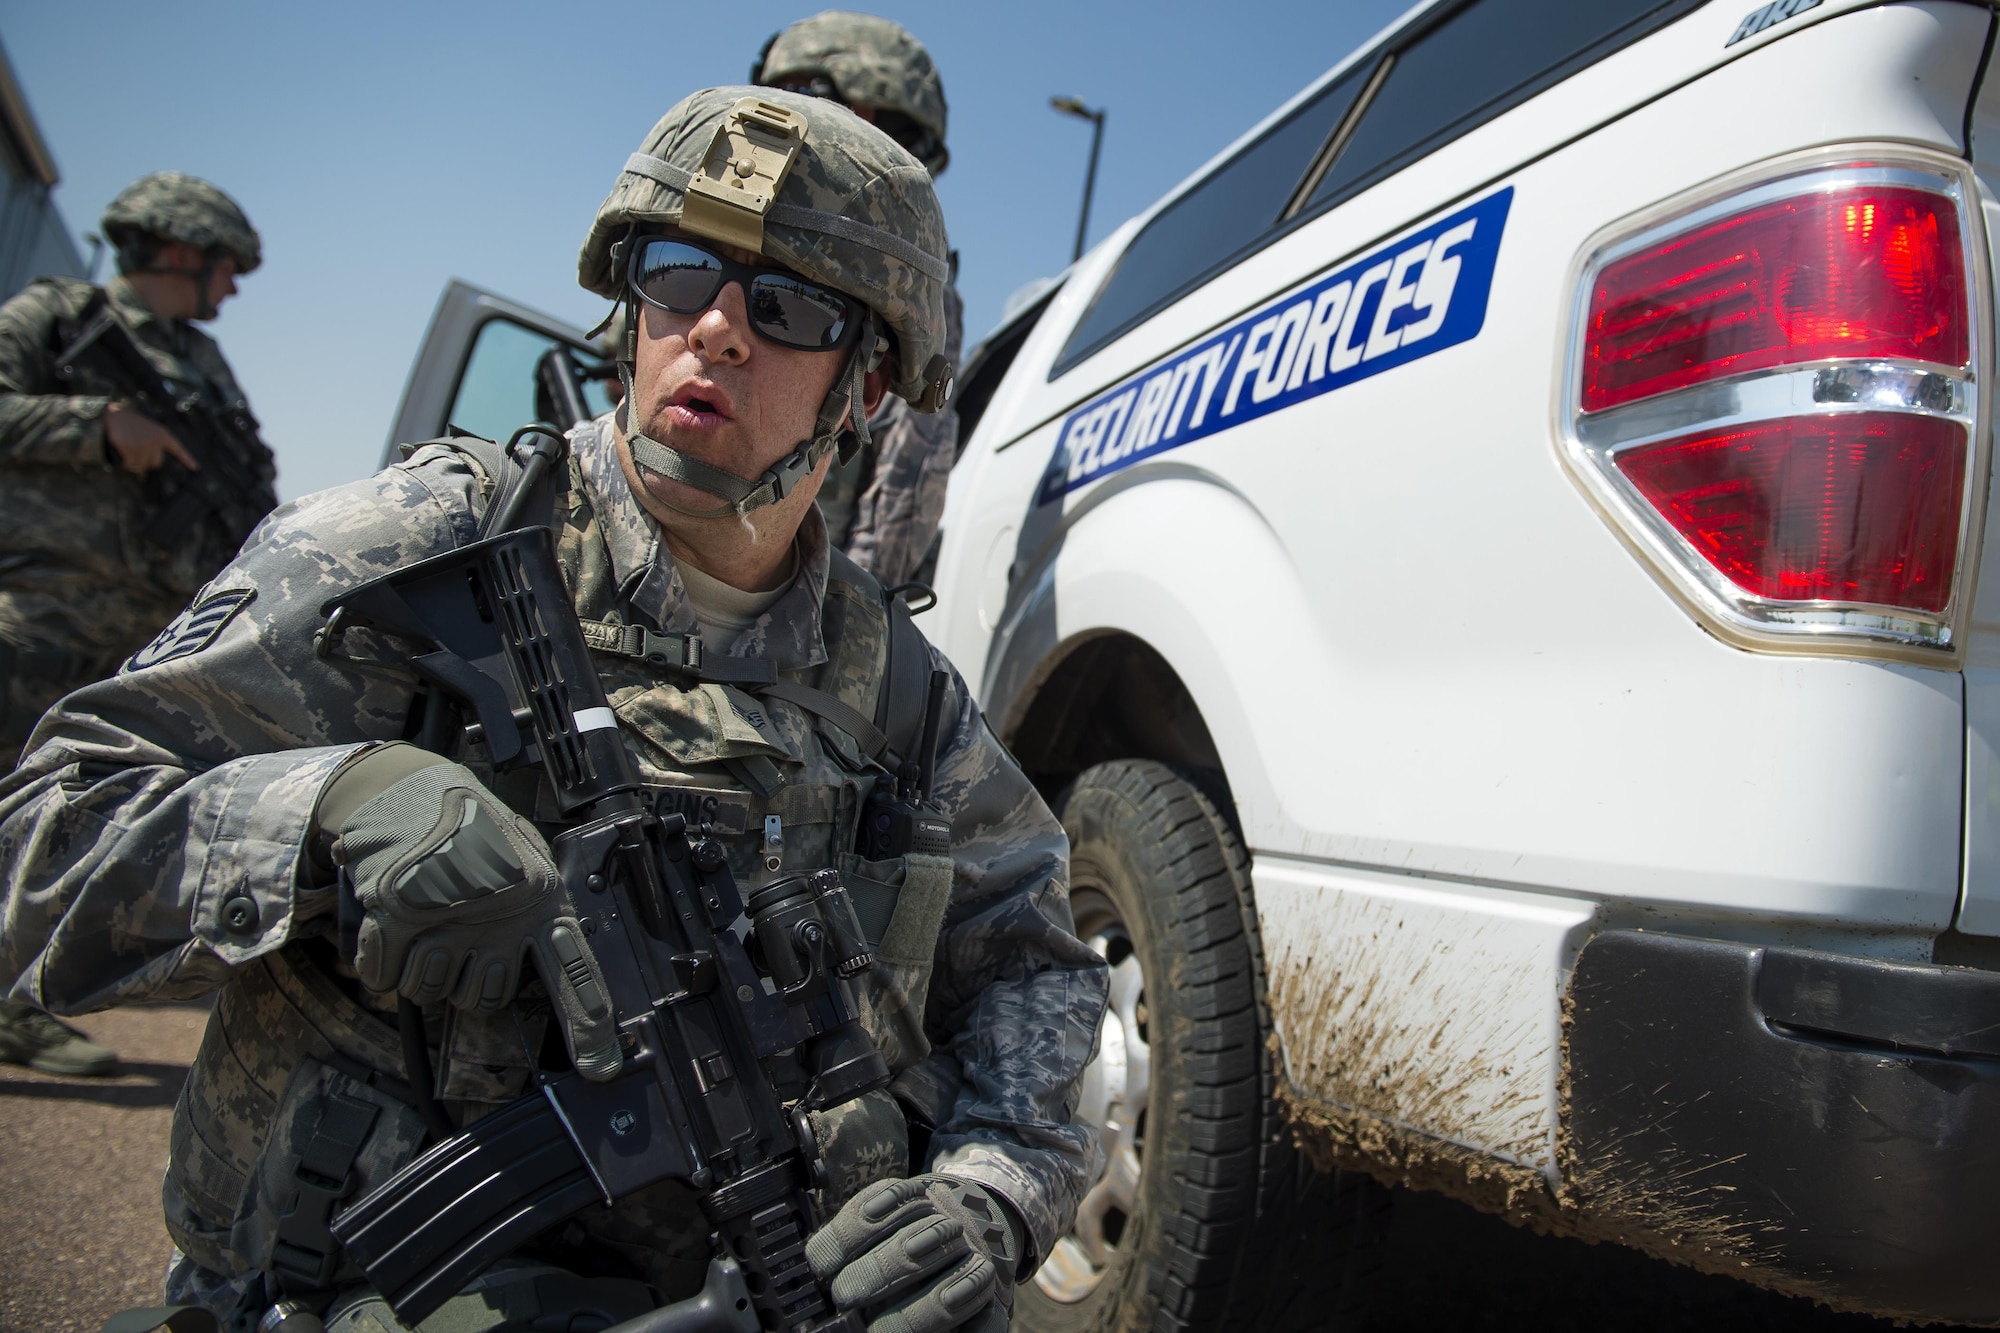 Staff Sgt. Christopher Scoggins, 50th Security Forces Squadron, responds to an active shooter scenario during Opinicus Vista 16-2, a base exercise at Schriever Air Force Base, Colorado, Thursday, June 16, 2016. The 50th Space Wing Inspector General office managed the two-week exercise, which was designed to test the wing's responses to various emergency situations including natural disaster and active shooter. (U.S. Air Force Photo/Dennis Rogers) 